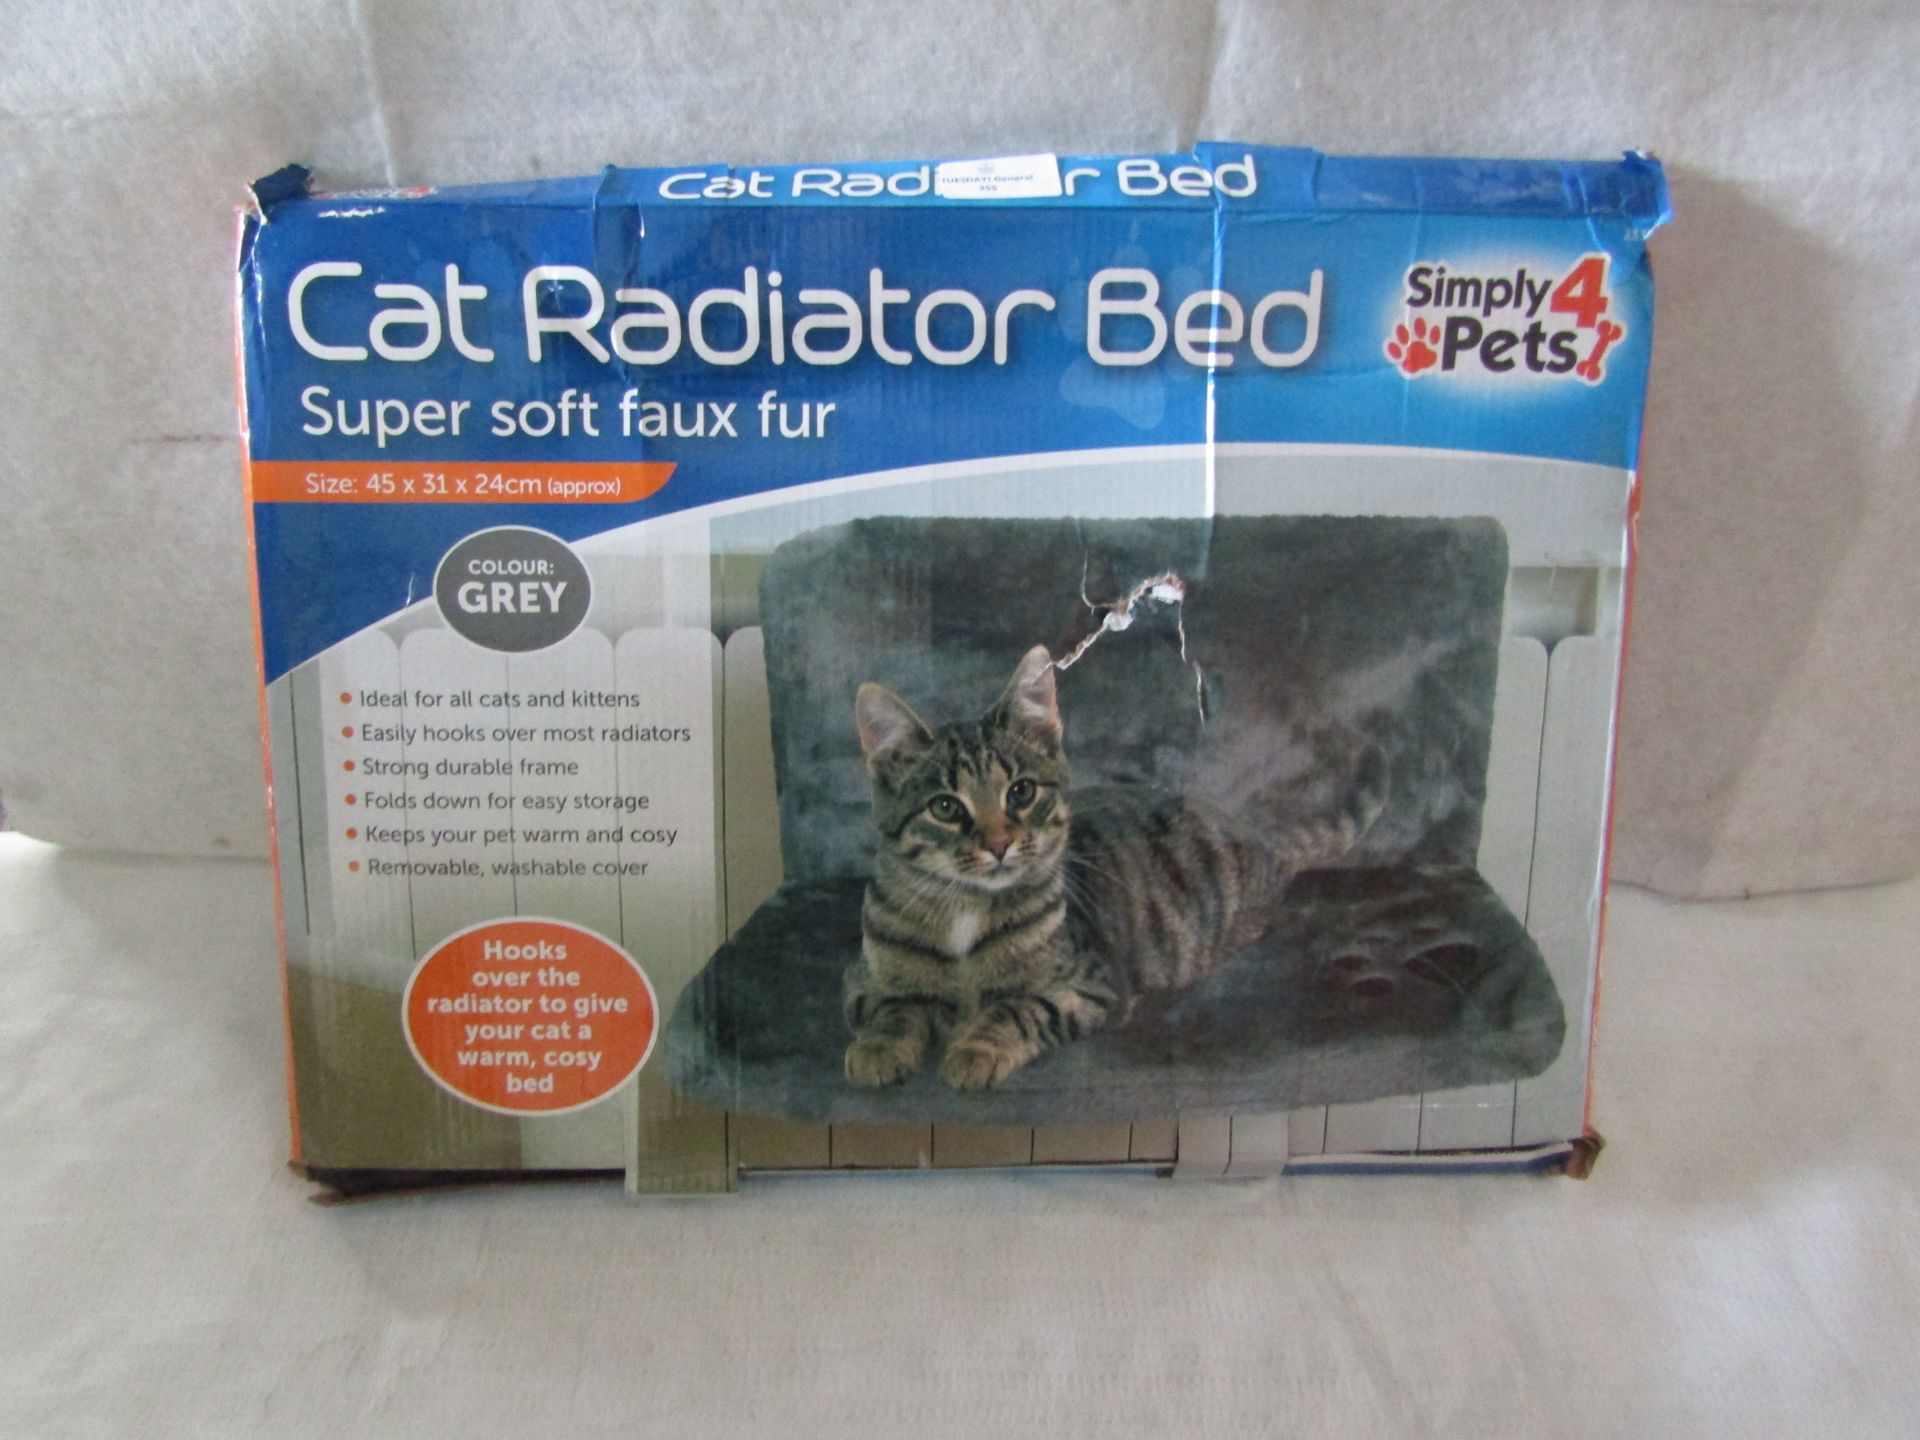 Simply4Pets - Super Soft Faux Fur Cat Radiator Bed - Boxed.